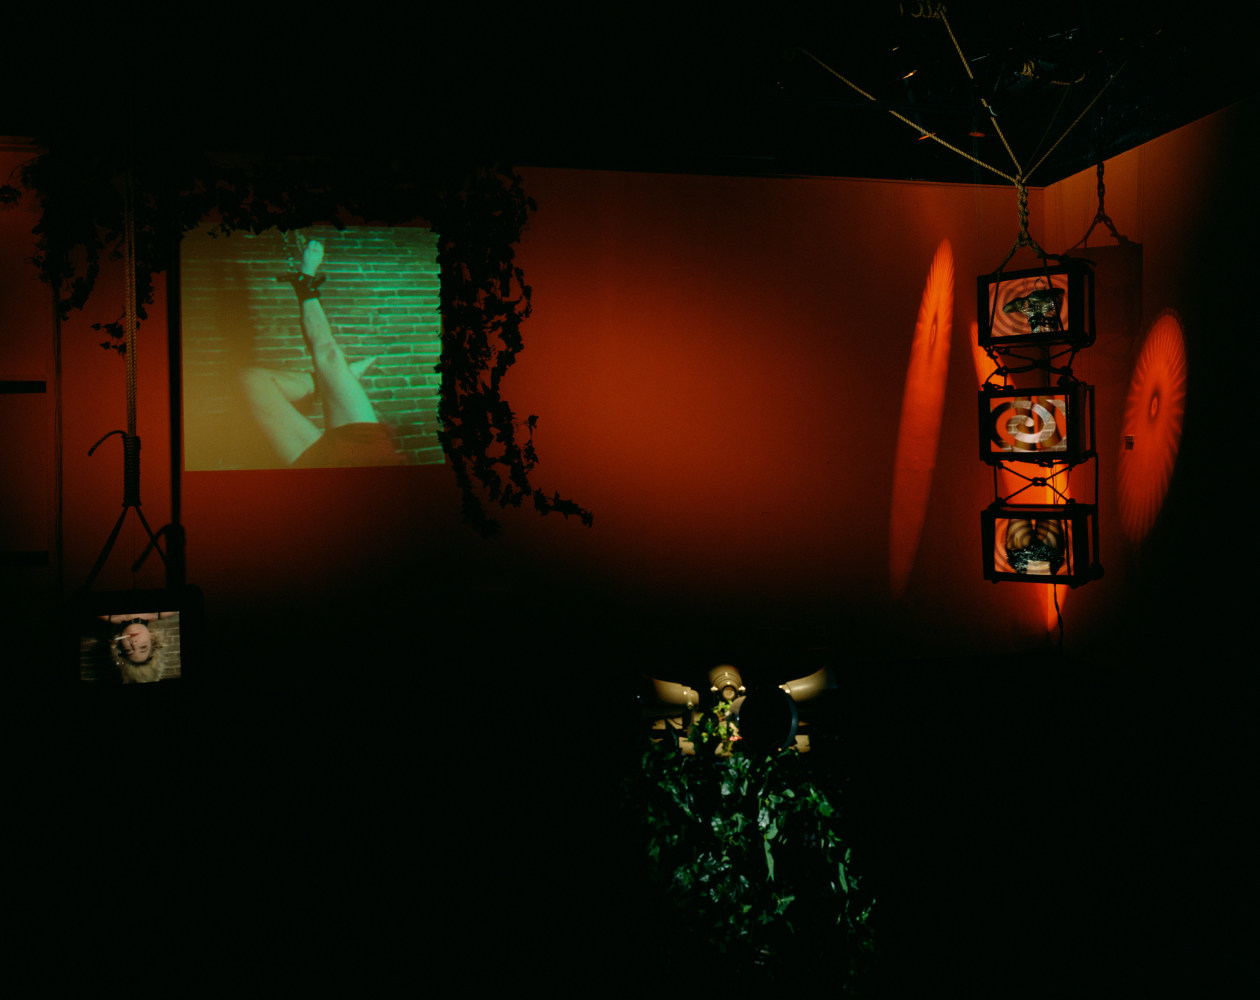 Charles Atlas

The Hanged One, 1997

Fifteen-channel video, mixed media, programmed lighting

Installation view, Whitney Museum of American Art, New York